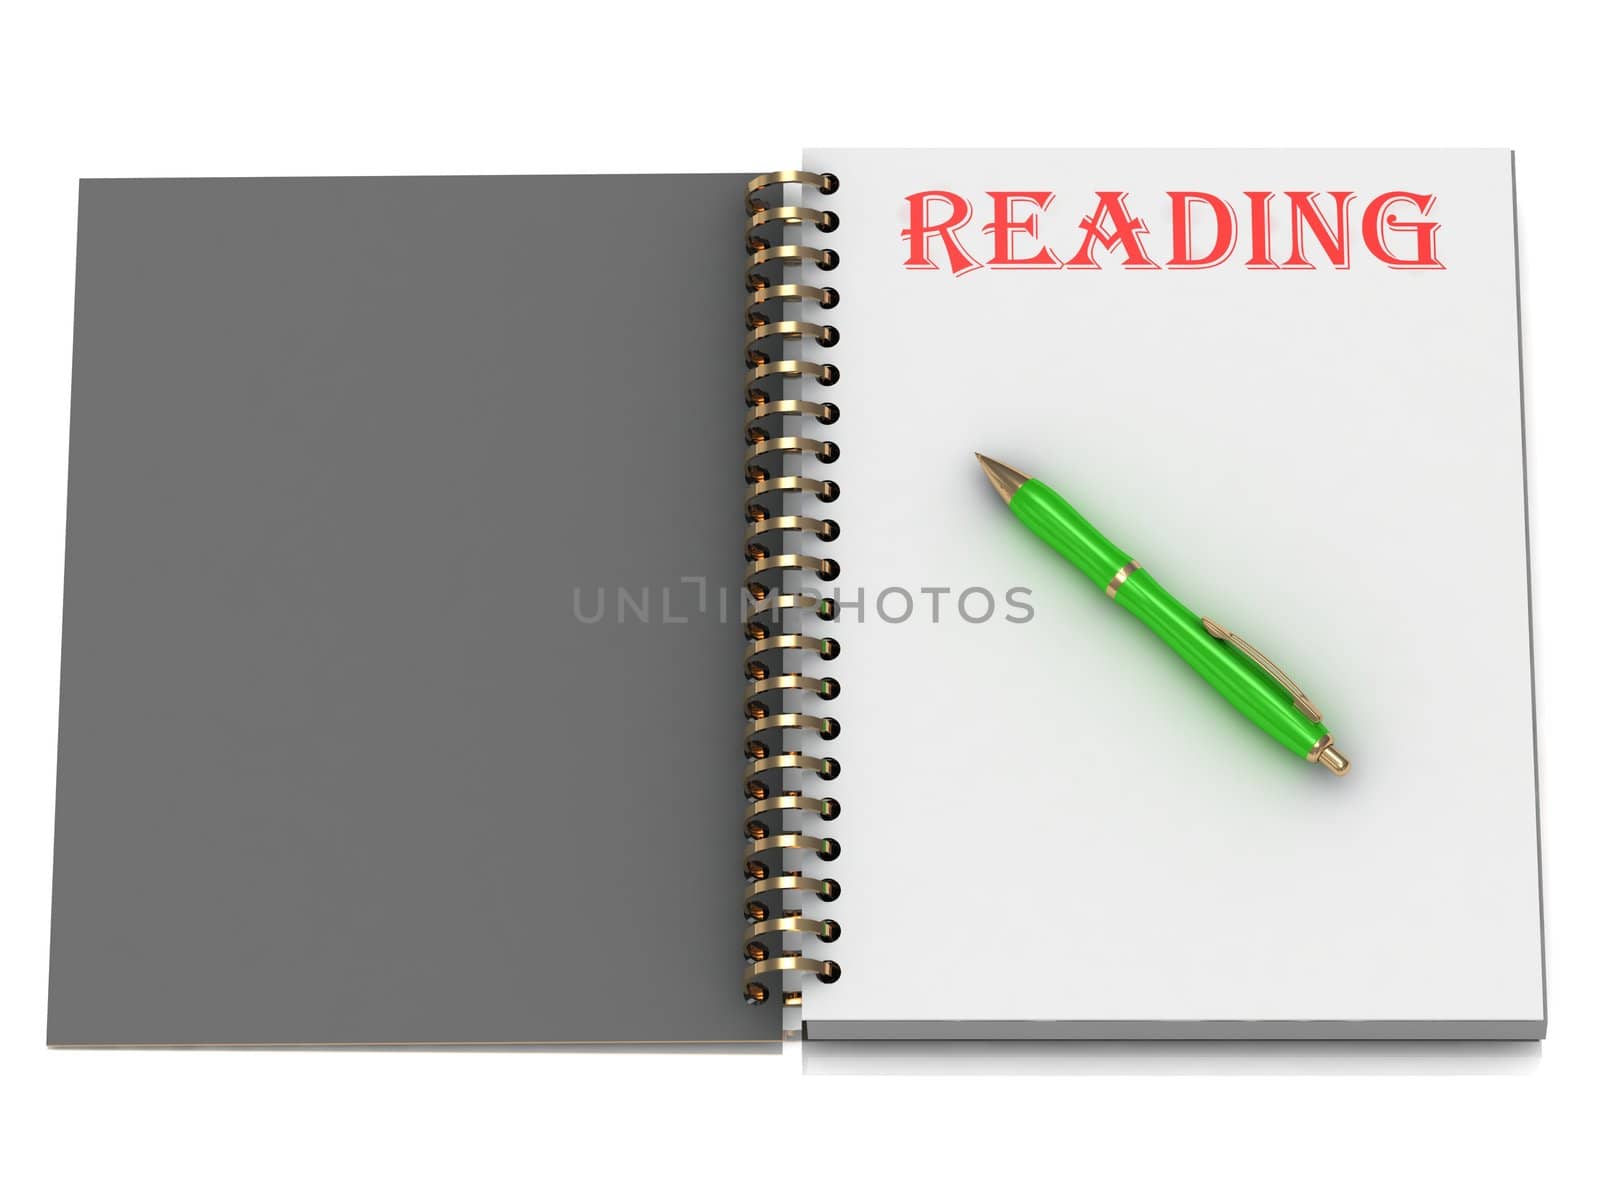 READING inscription on notebook page and the green handle. 3D illustration isolated on white background